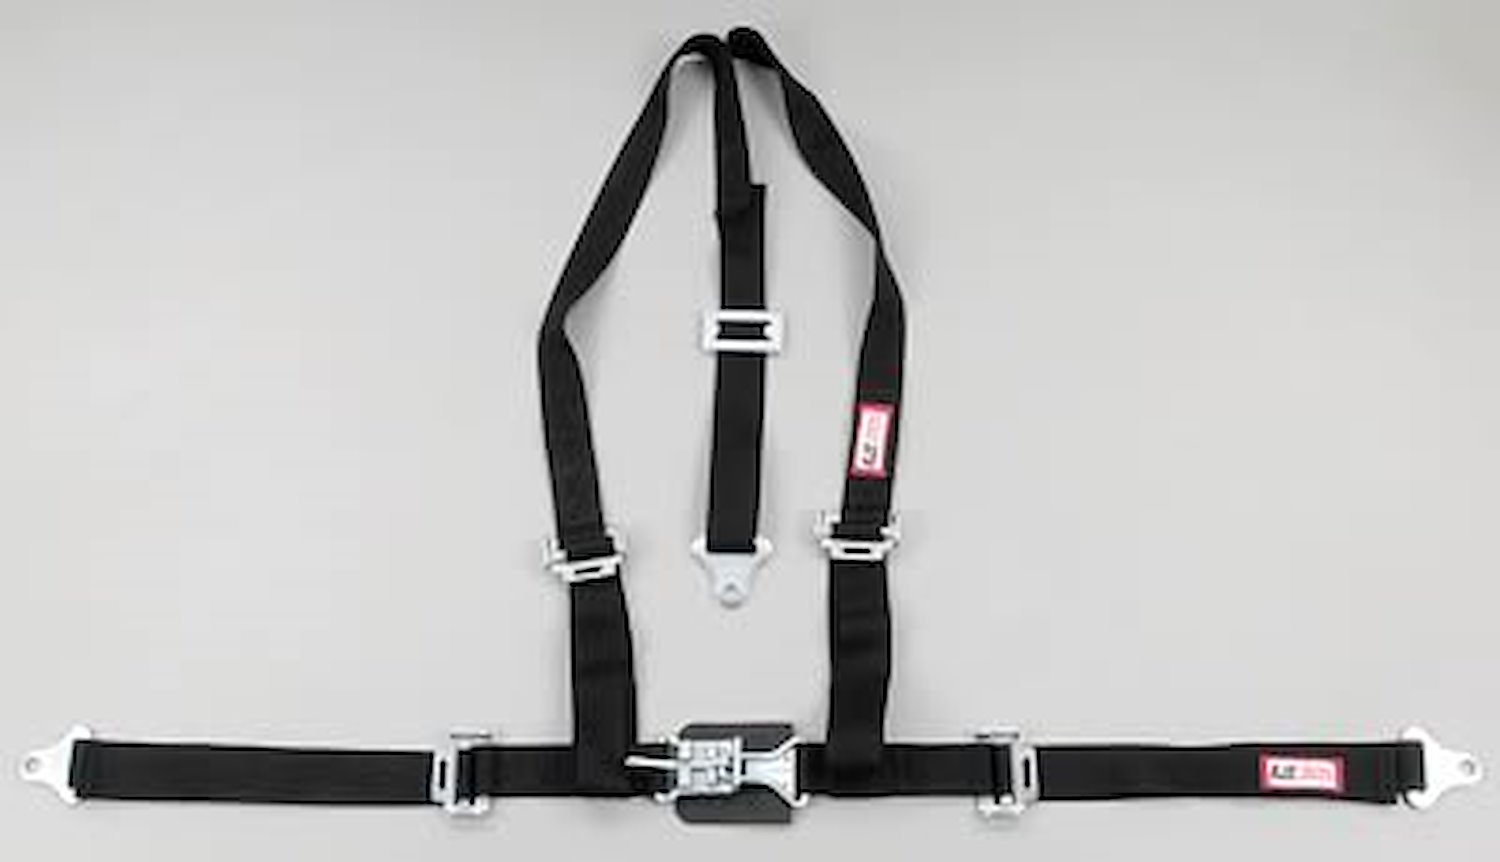 NON-SFI L&L HARNESS 2 PULL DOWN Lap Belt SNAP SEWN IN 2 S.H. INDIVIDUAL FLOOR Mount WRAP/BOLT RED